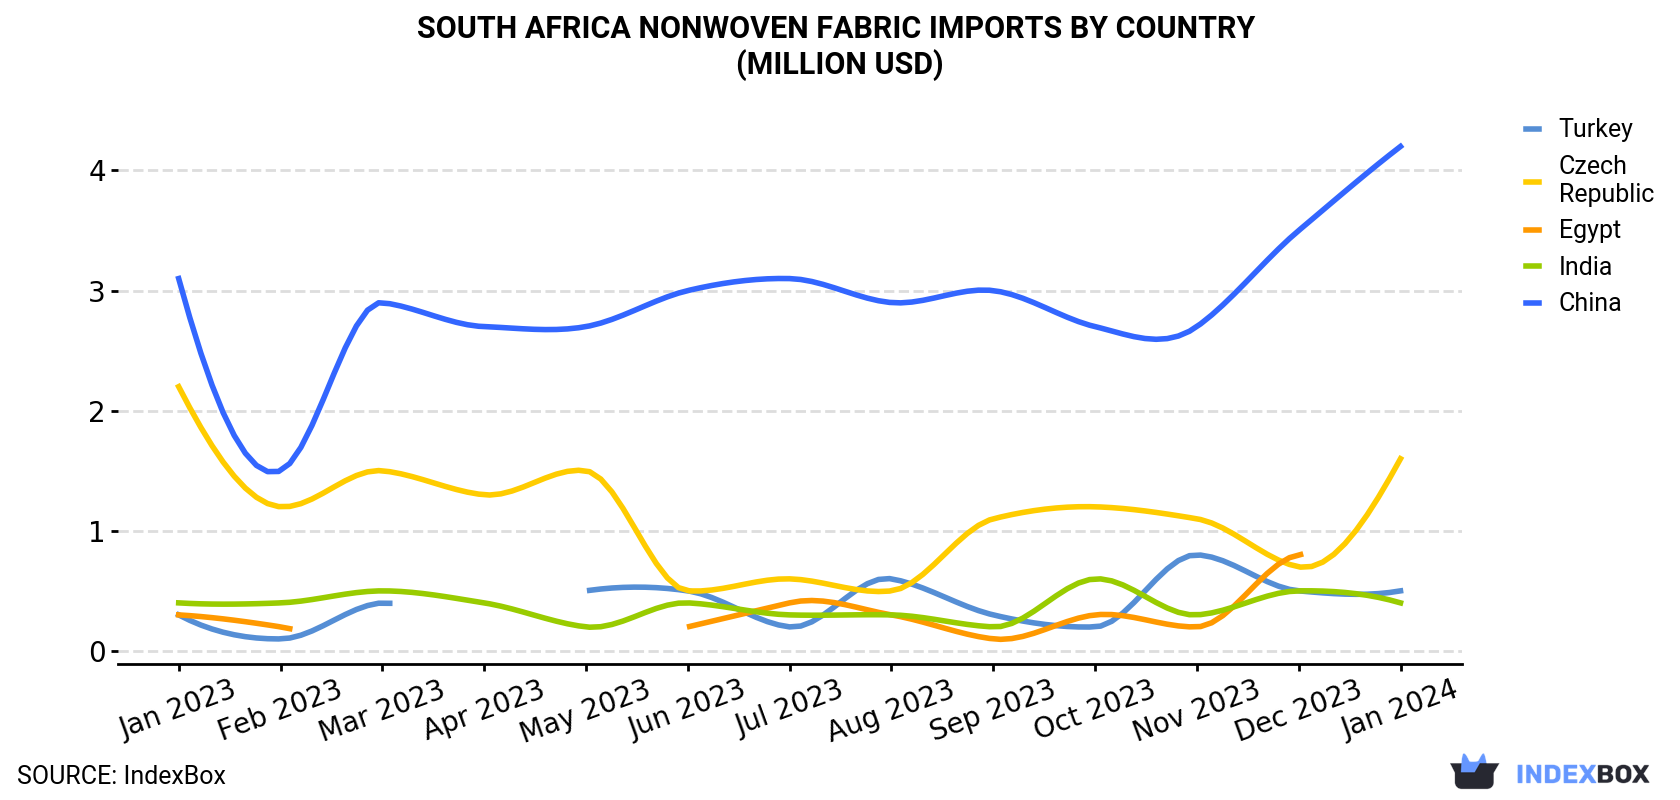 South Africa Nonwoven Fabric Imports By Country (Million USD)